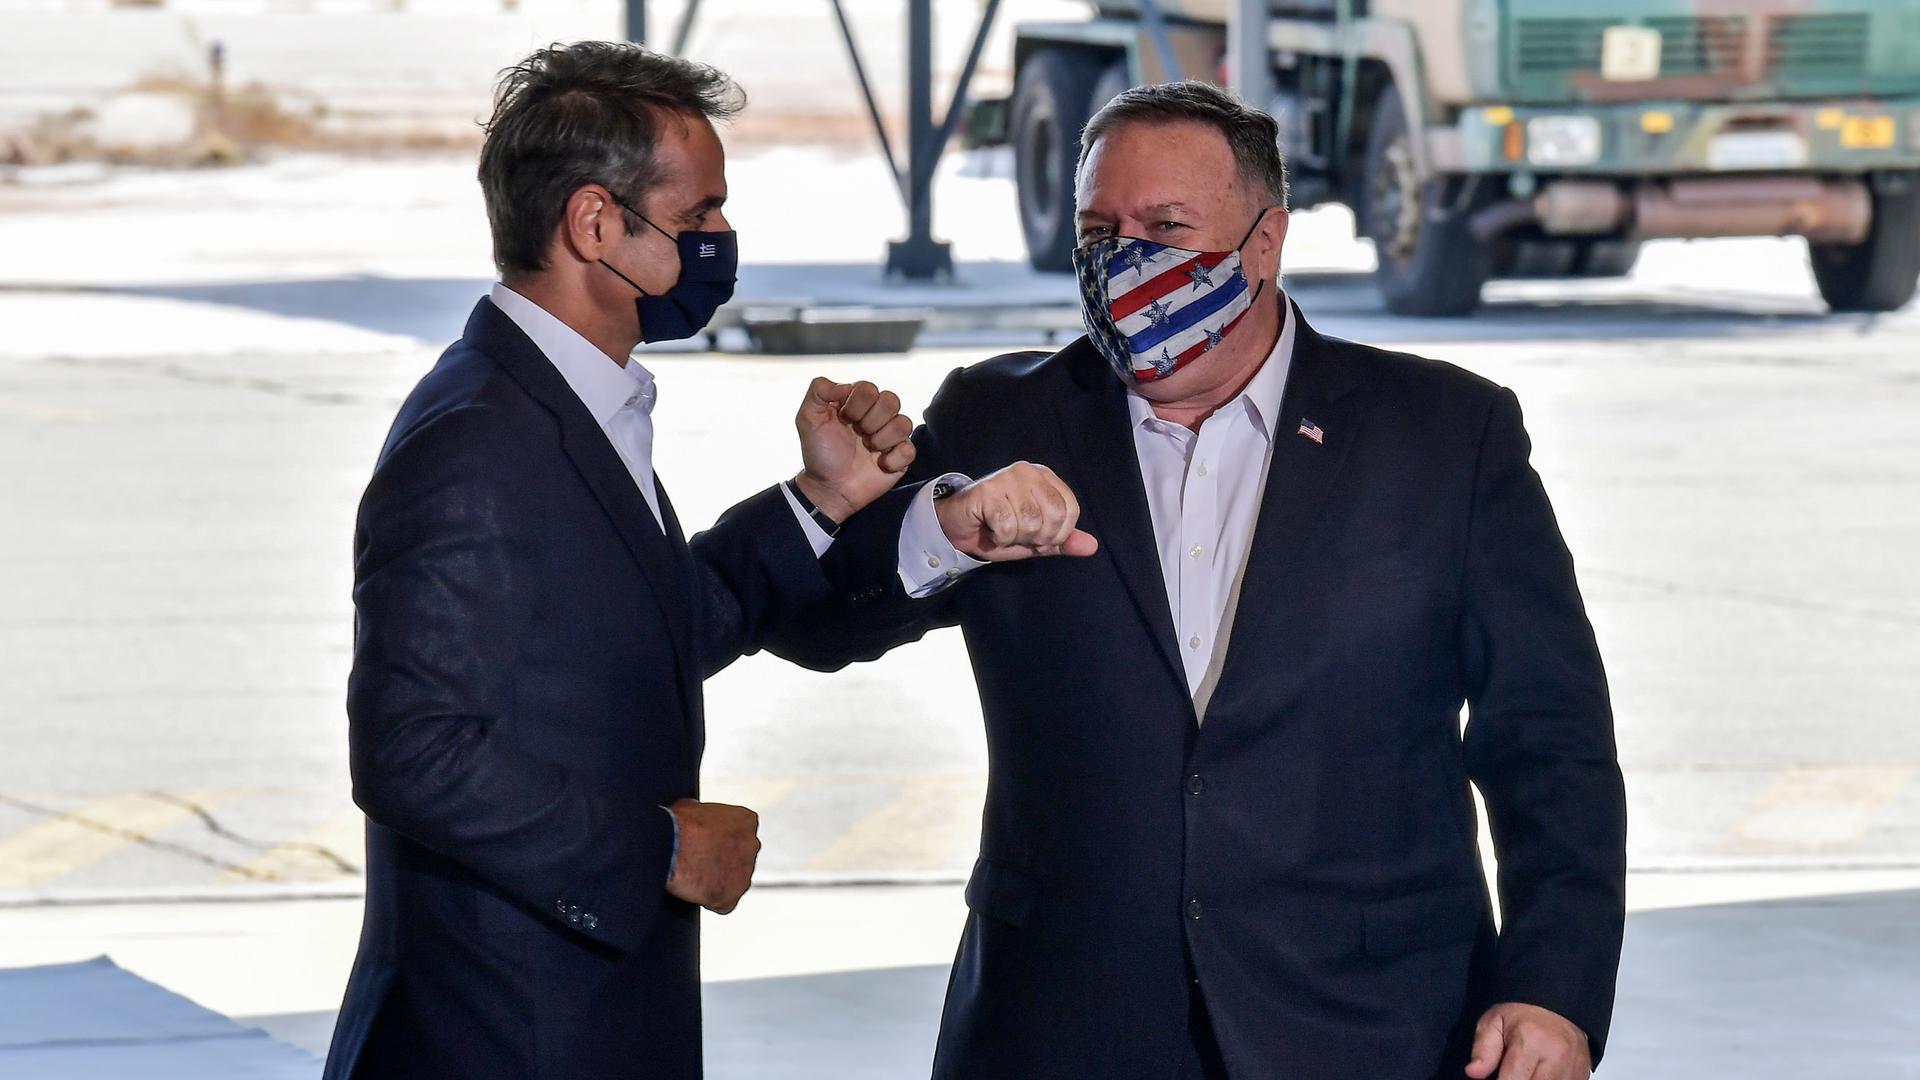 US Secretary of State Mike Pompeo, right, and Greek Prime Minister Kyriakos Mitsotakis are shown both wearing dark blazers and bumping elbows.